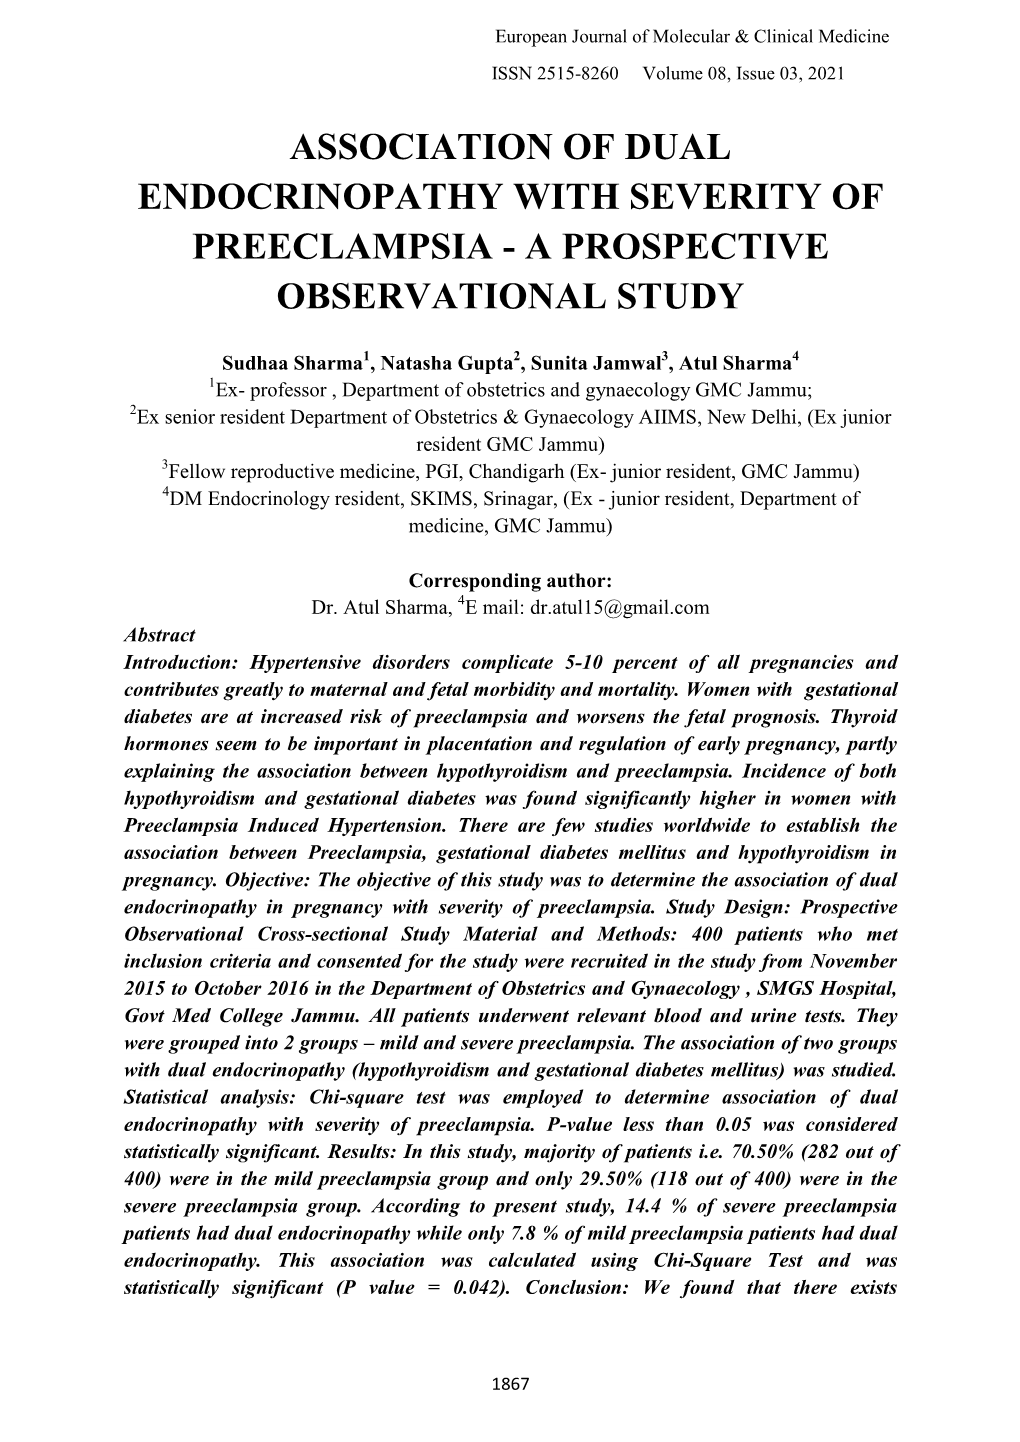 Association of Dual Endocrinopathy with Severity of Preeclampsia - a Prospective Observational Study